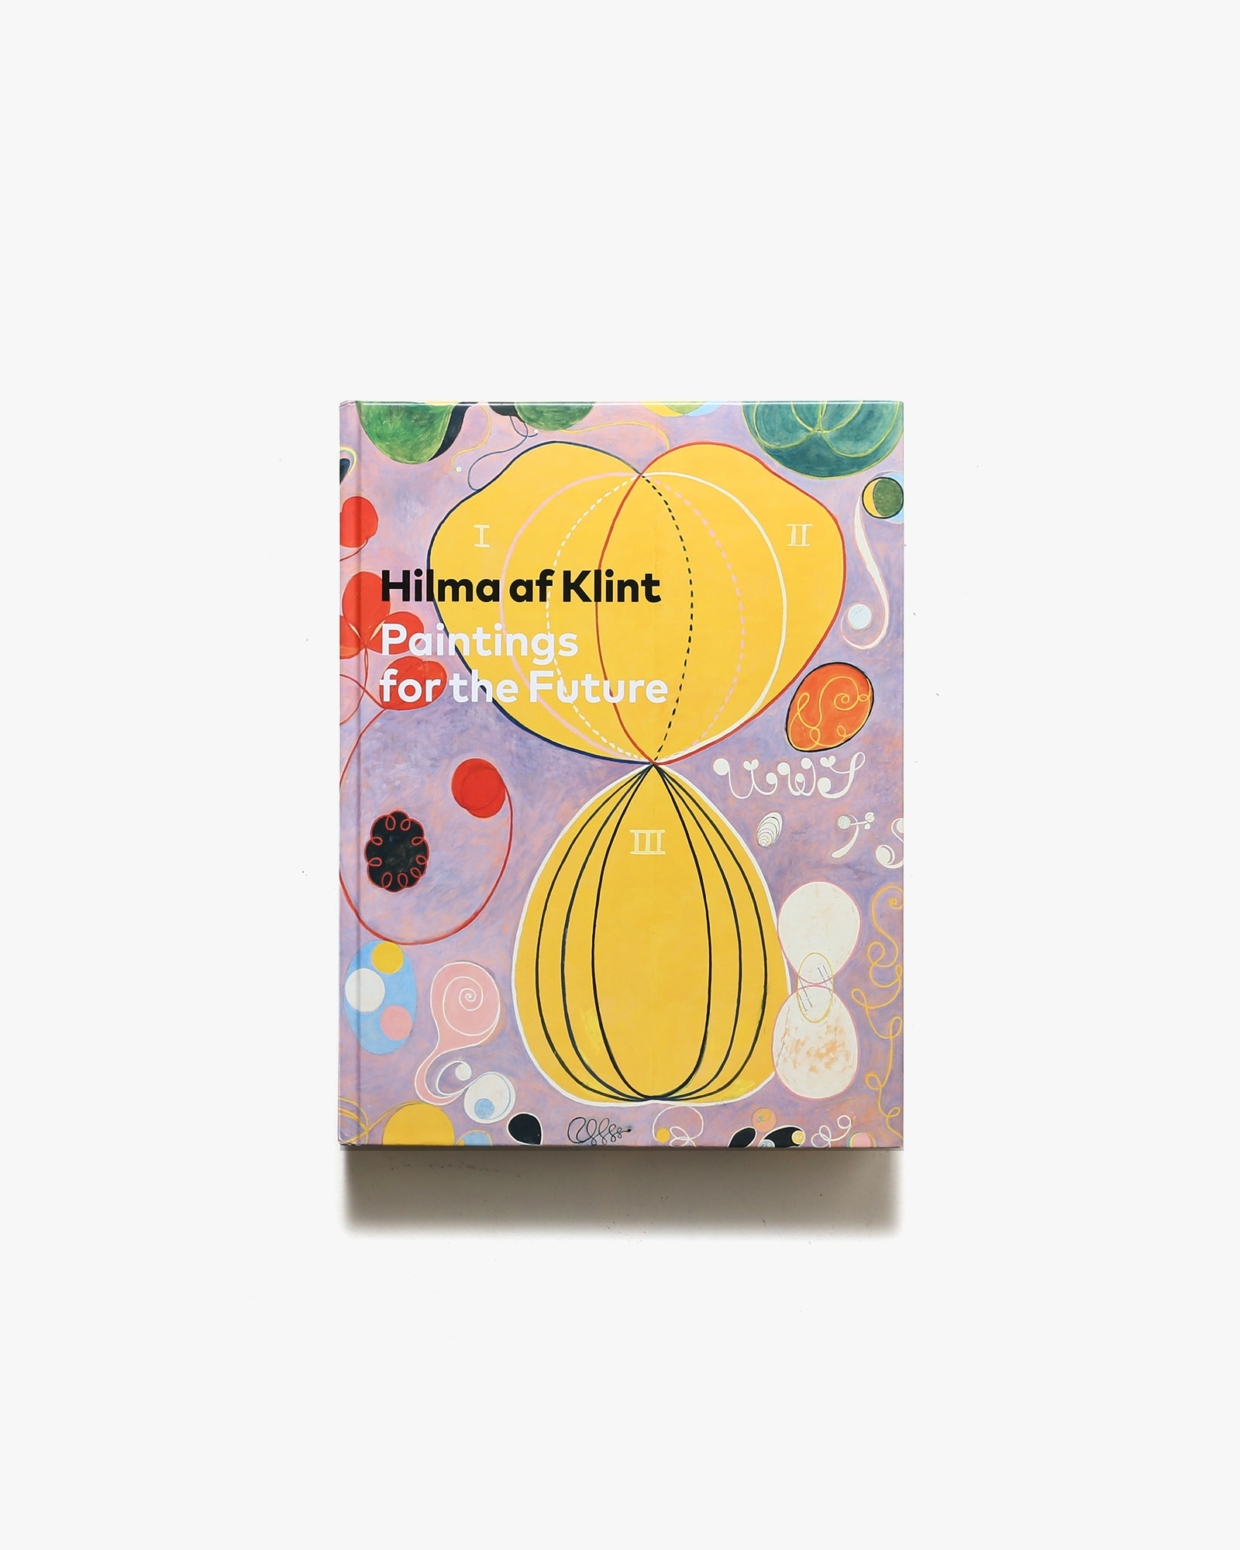 Hilma af Klint: Paintings for the Future | ヒルマ・アフ・クリント画集